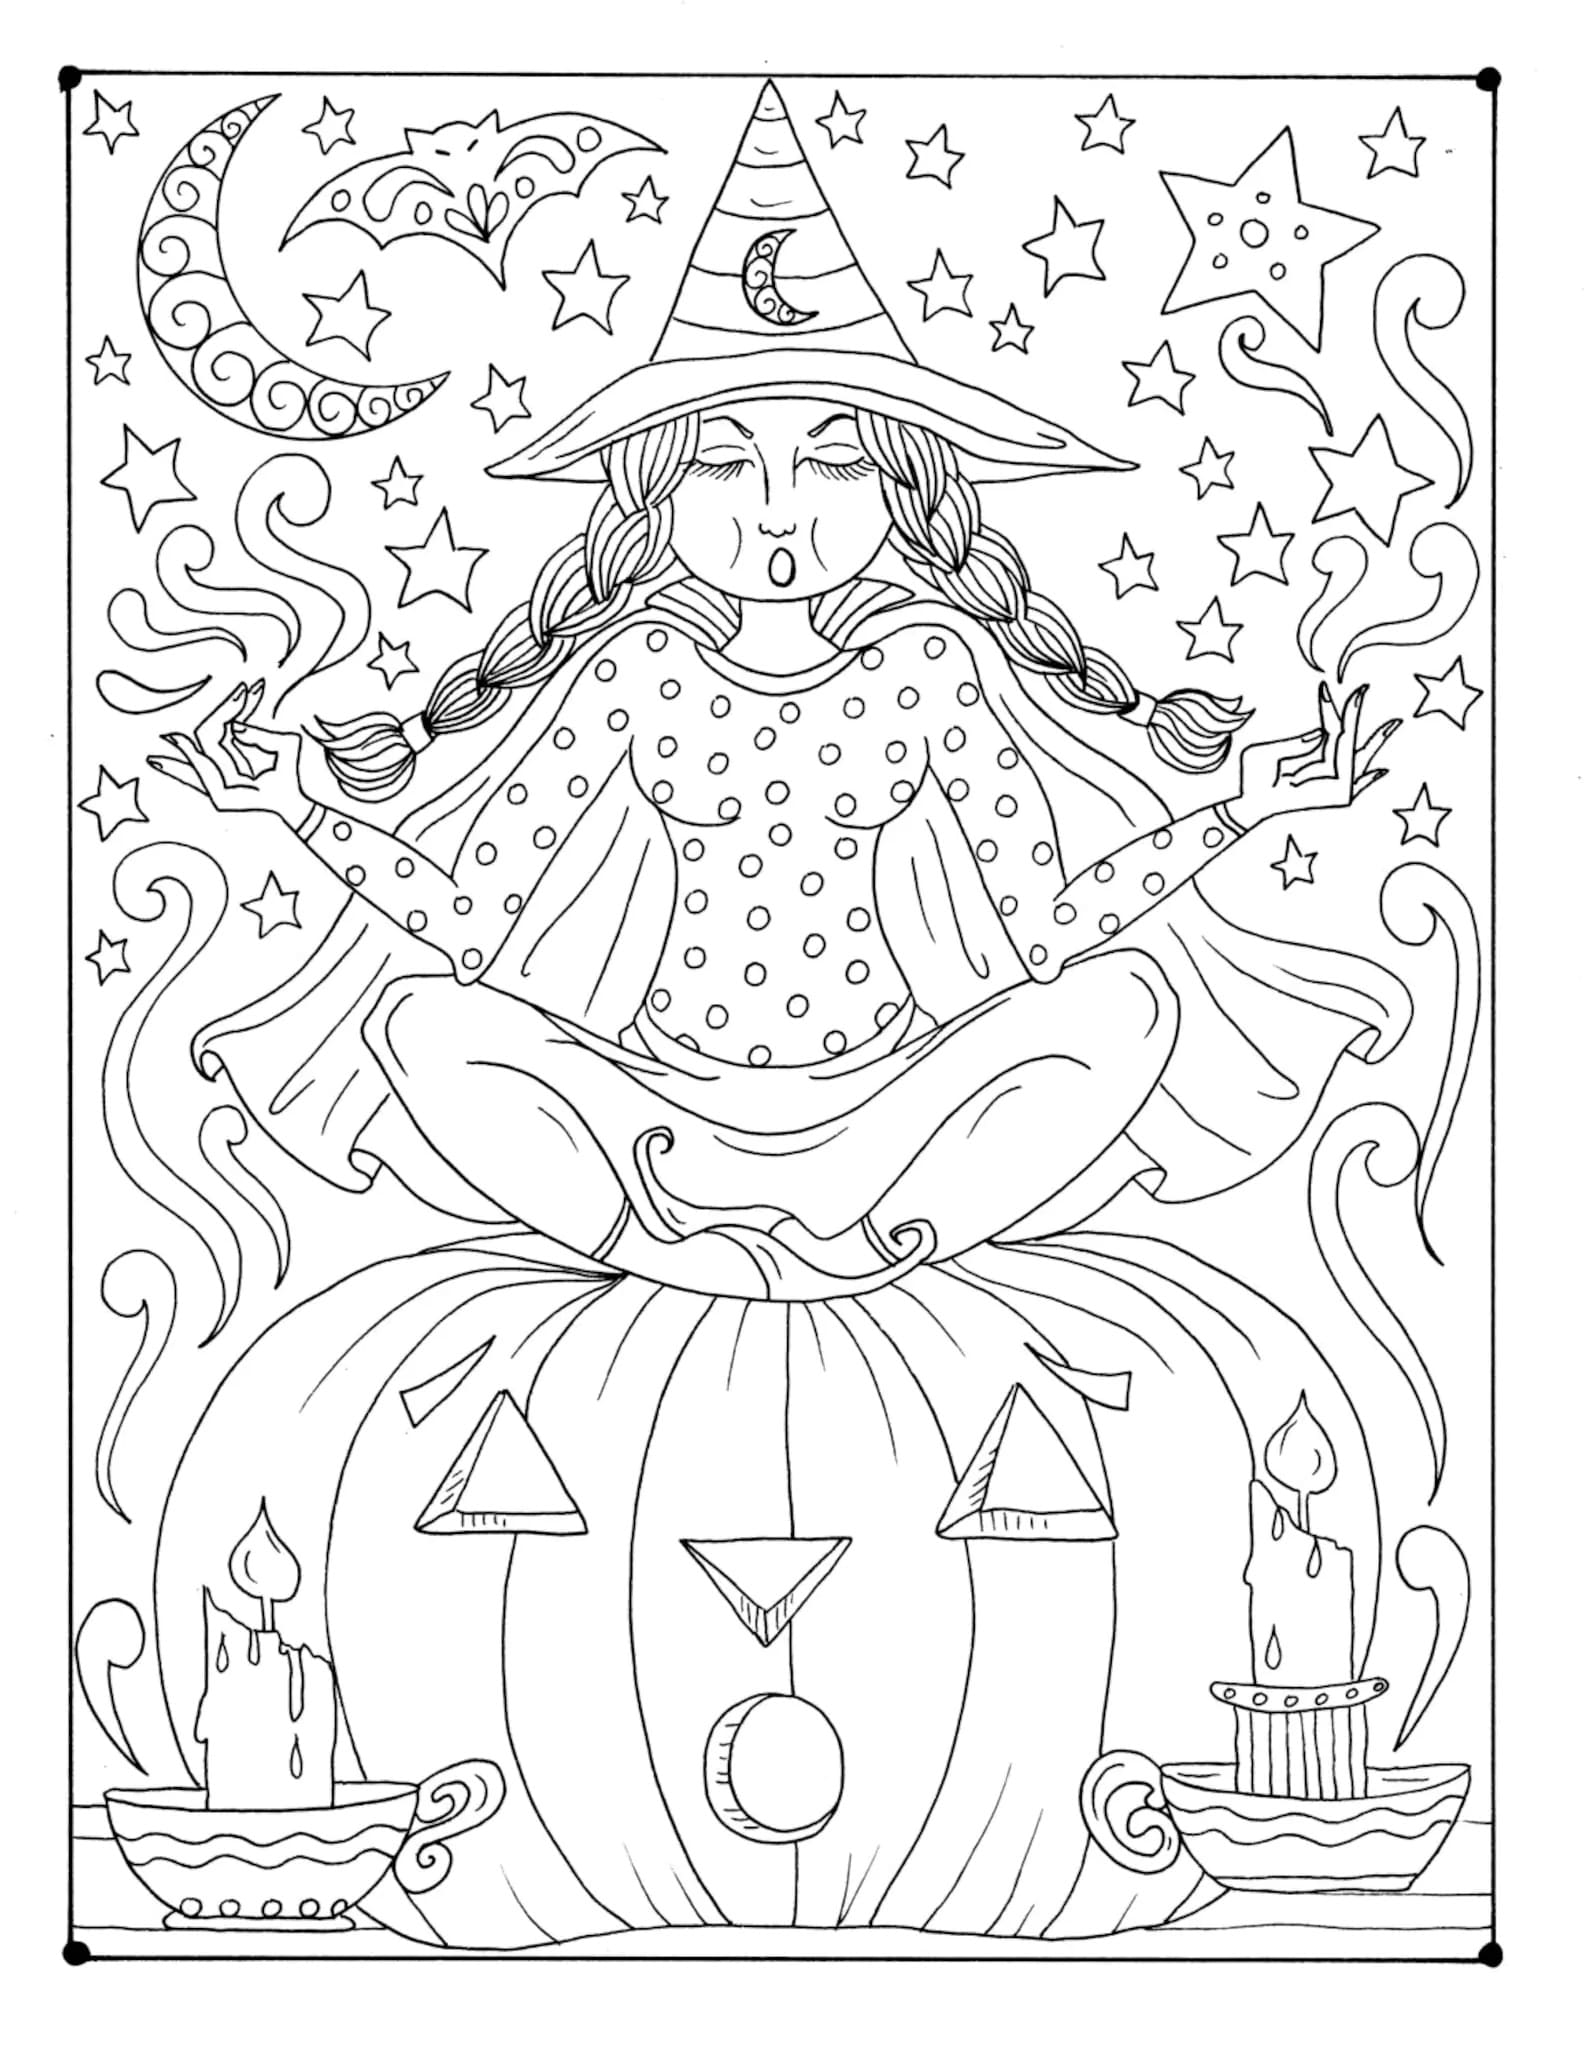 Raskrasil.com-Coloring-Pages-Halloween-for-adults-86